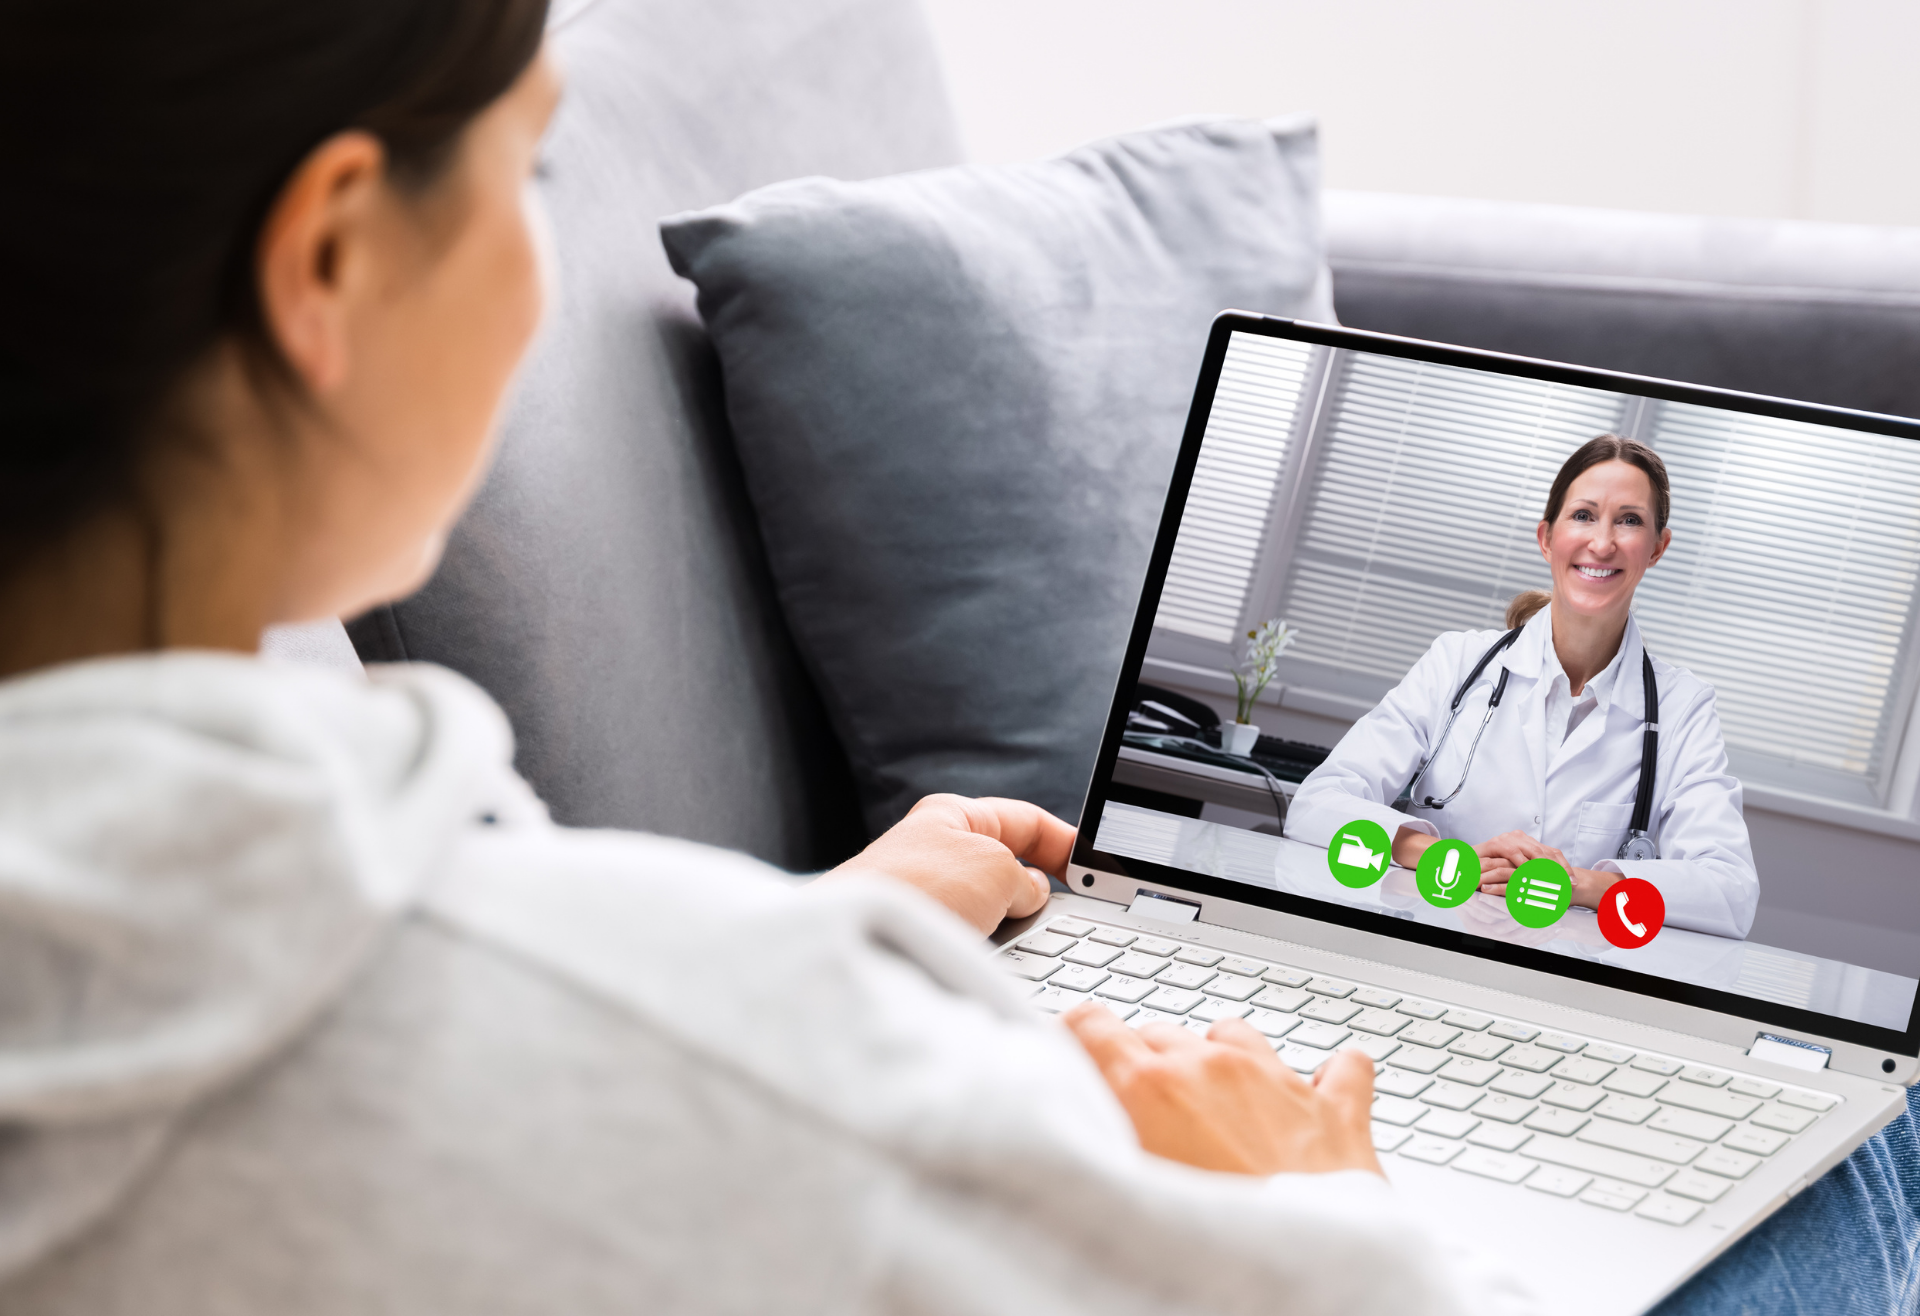 Women meeting with Doctor through Telemedicine appointment